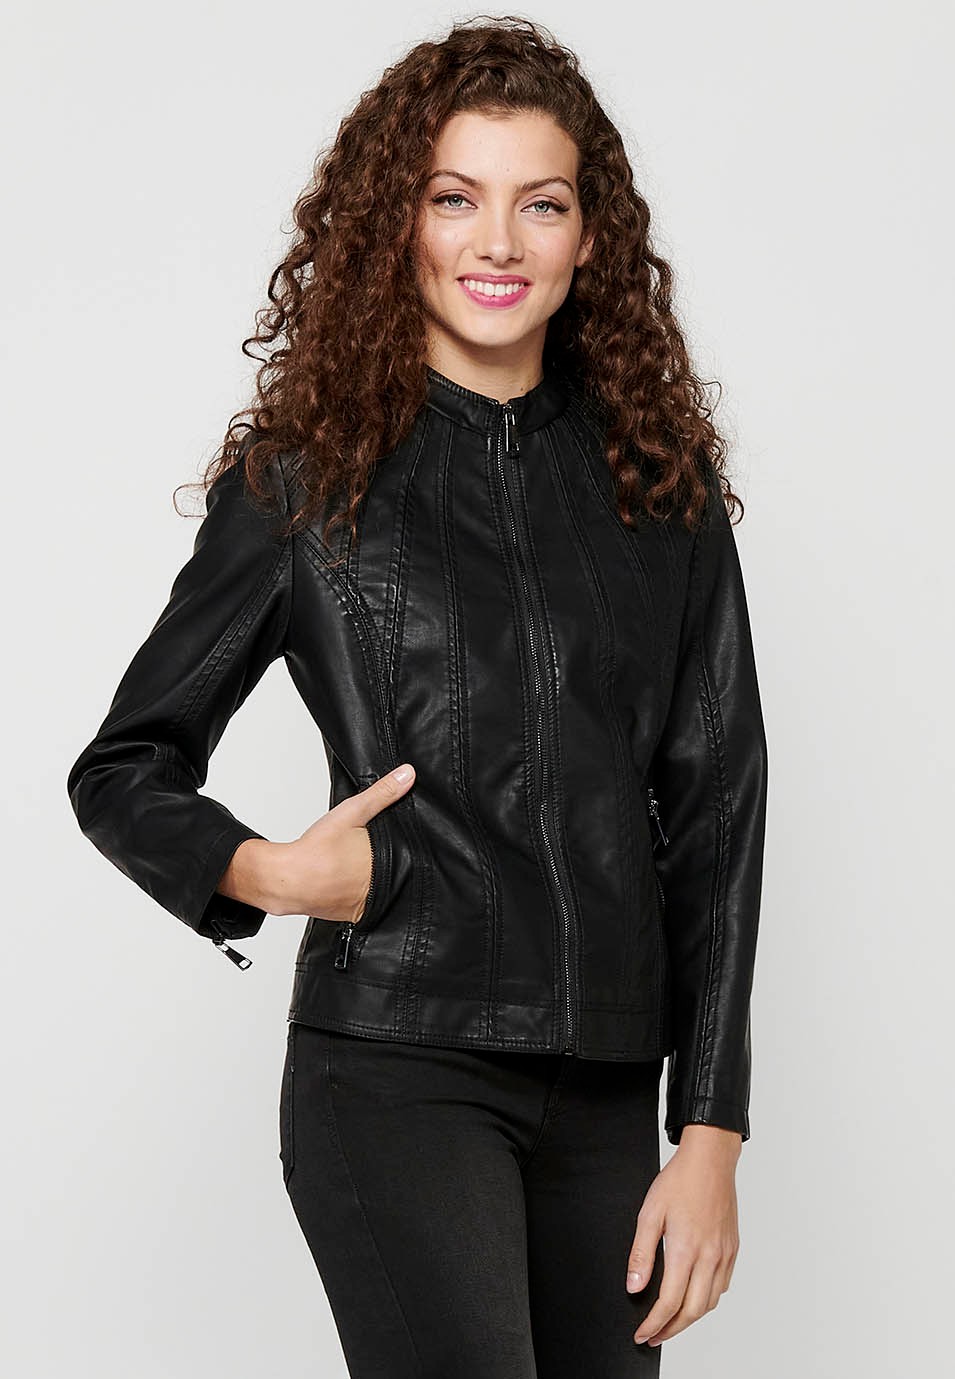 Long Sleeve Jacket with Round High Neck and Front Zipper Closure in Black for Women